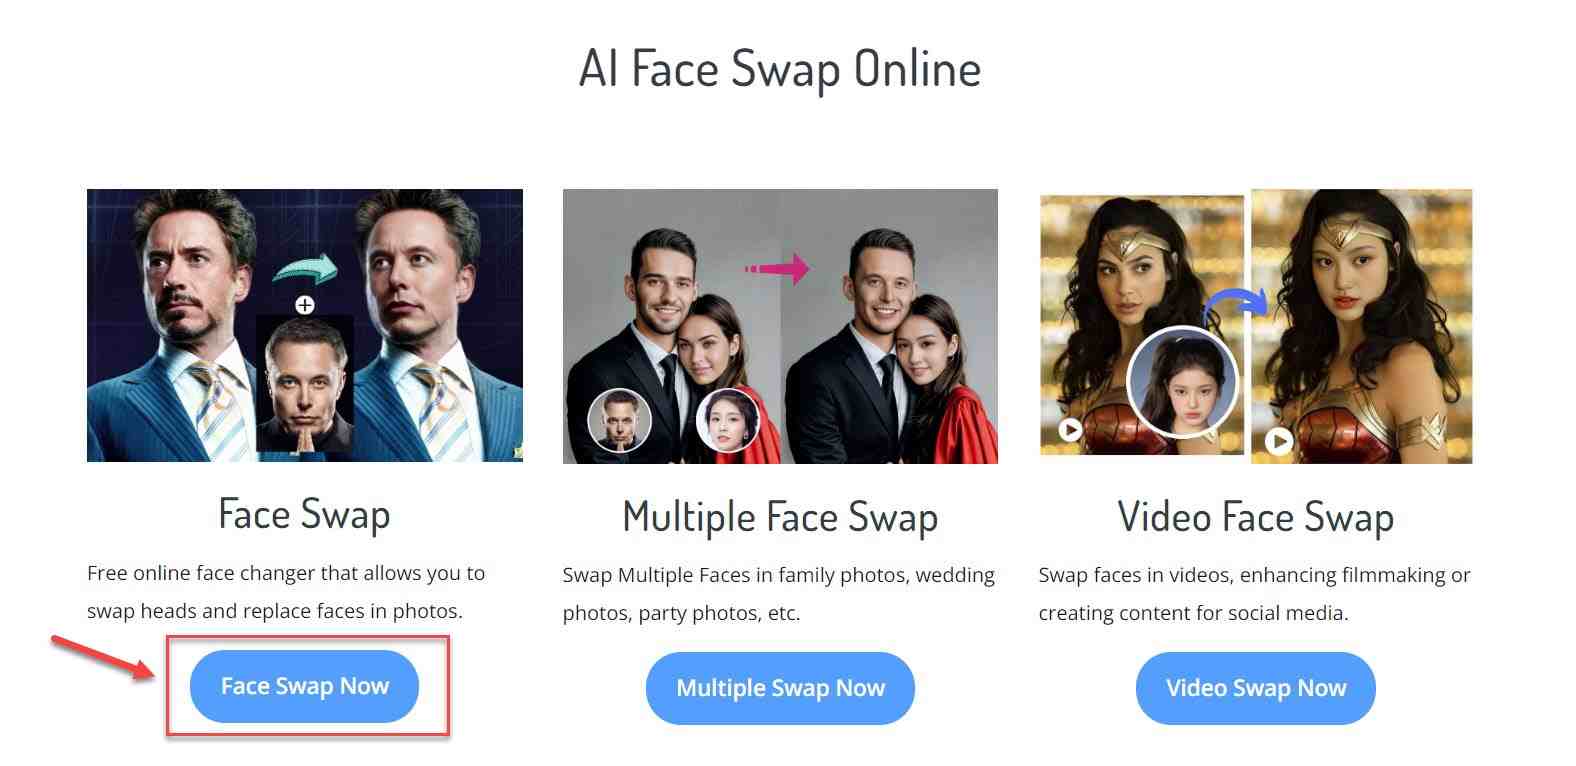 remaker-ai-interface-showing-face-swap-now-option-with-face-swap-multiple-face-swap-and-video-face-swap-features